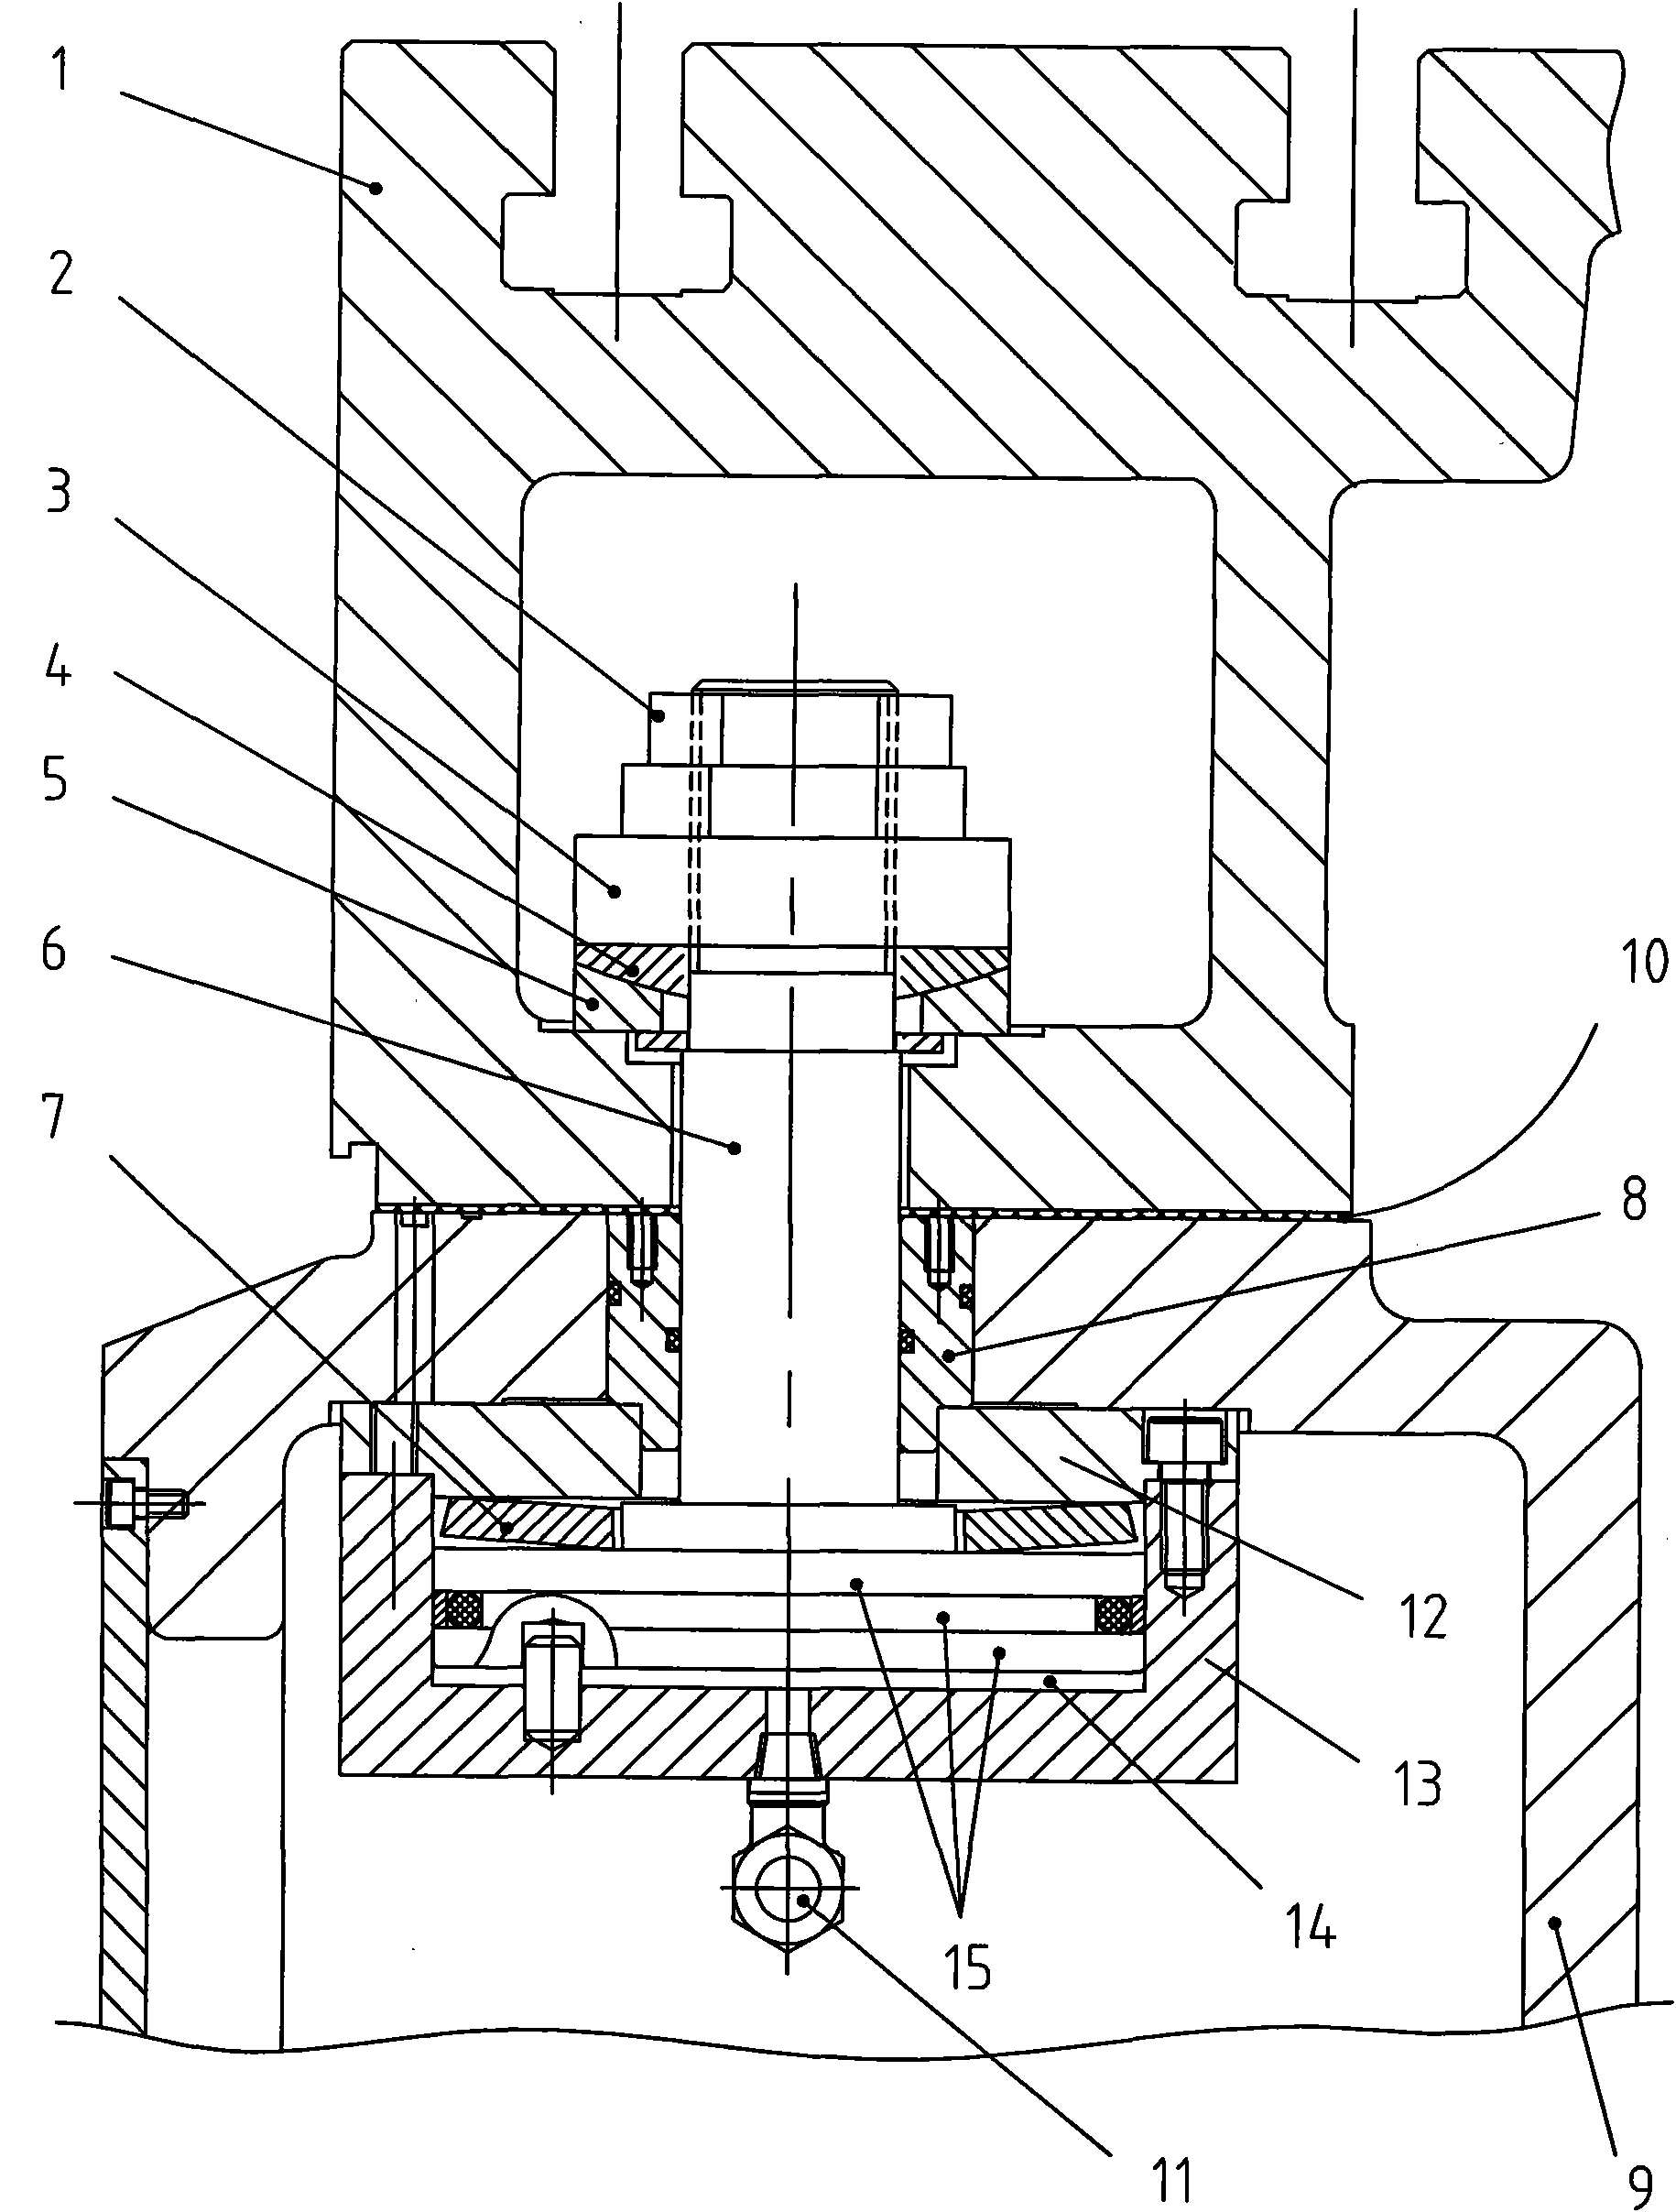 Mechanical clamping device for rotary workbench